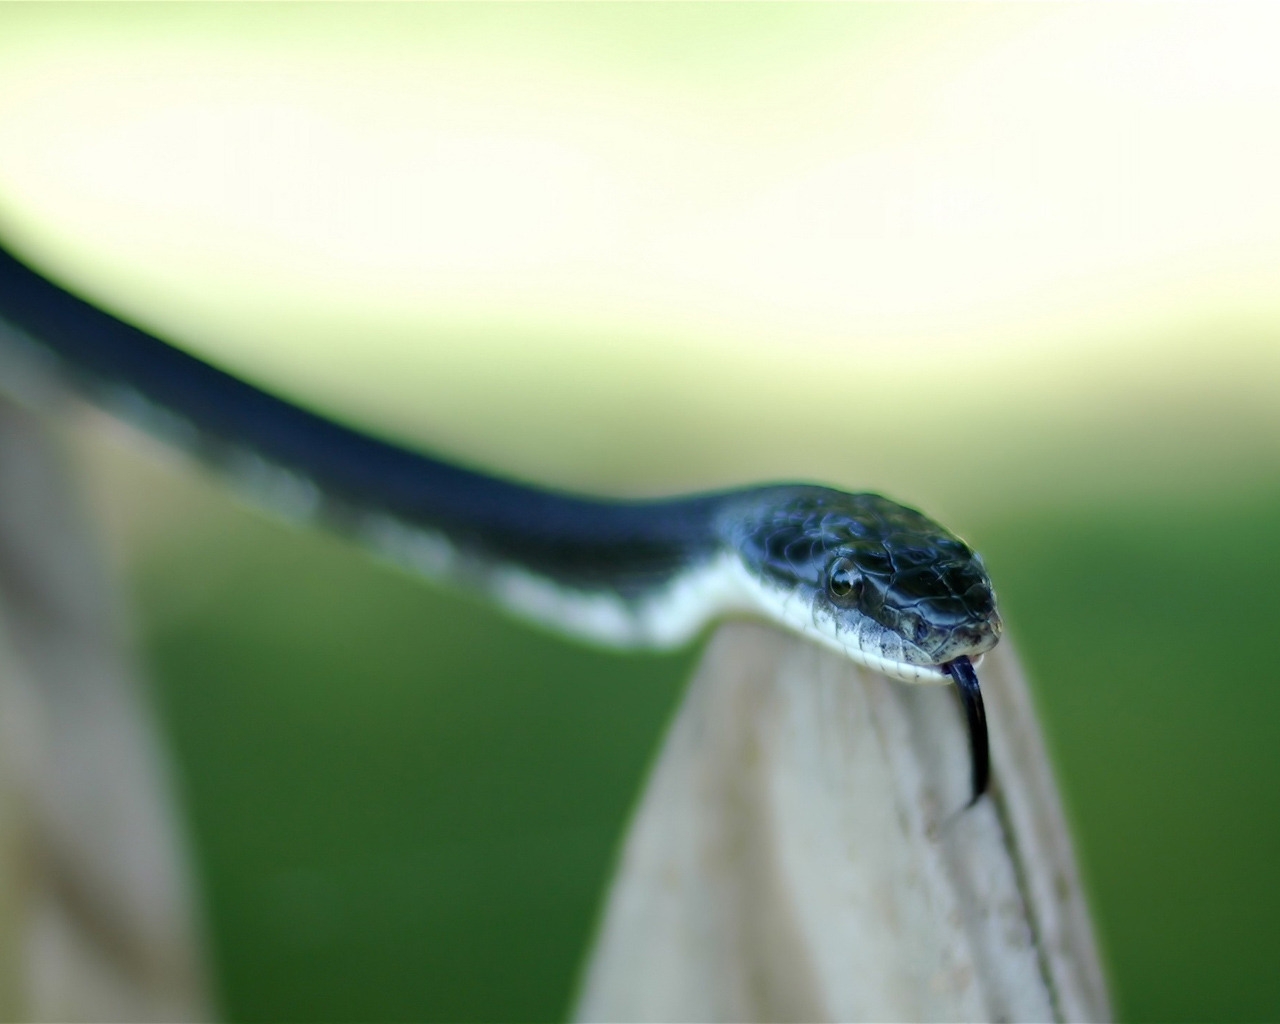 Snake Tongue for 1280 x 1024 resolution